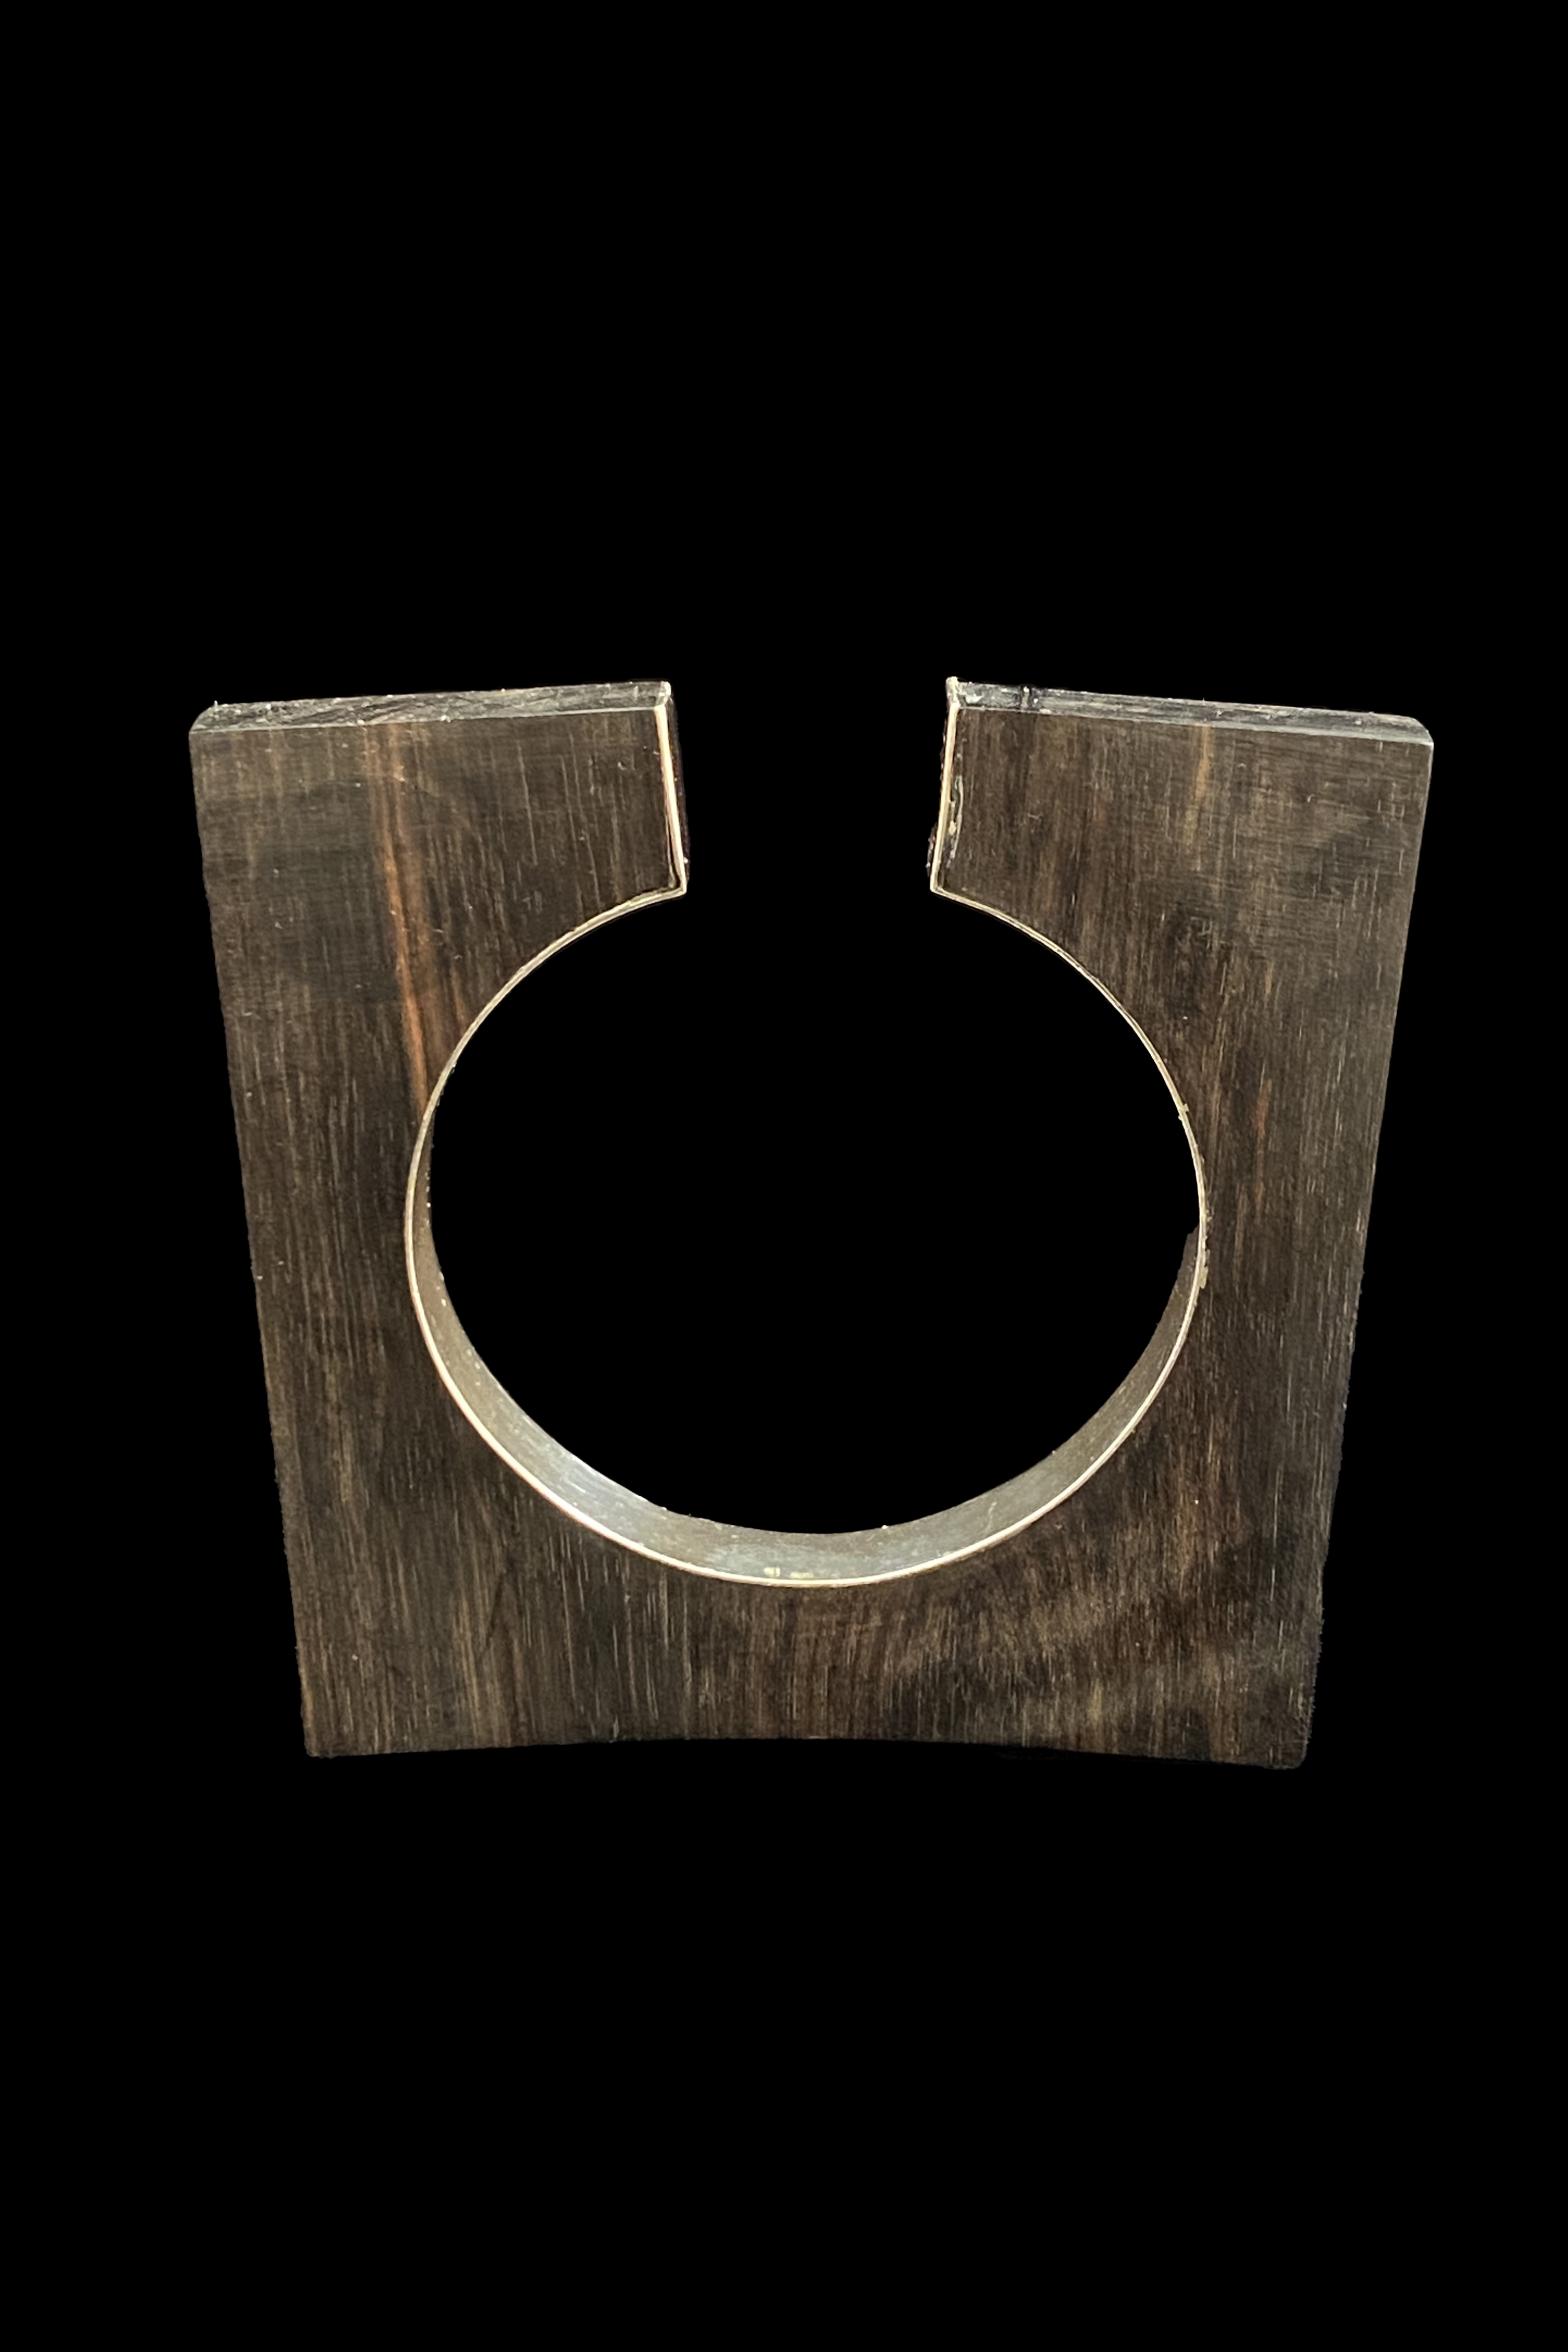 Square Ebony Wood Bracelet with Sterling Silver Inset